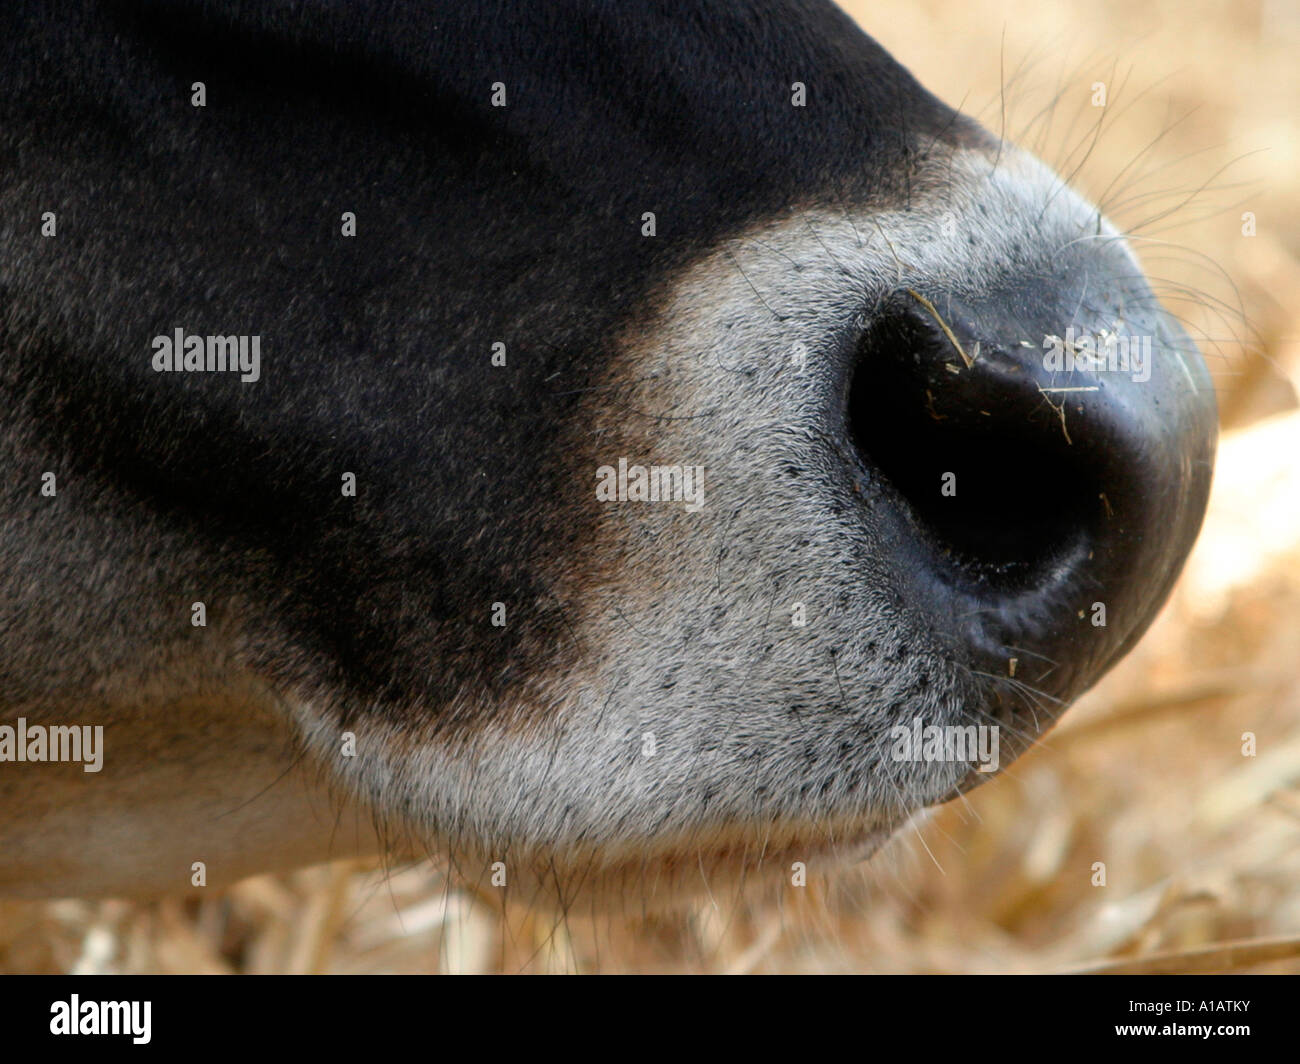 The nose of a cow. Stock Photo